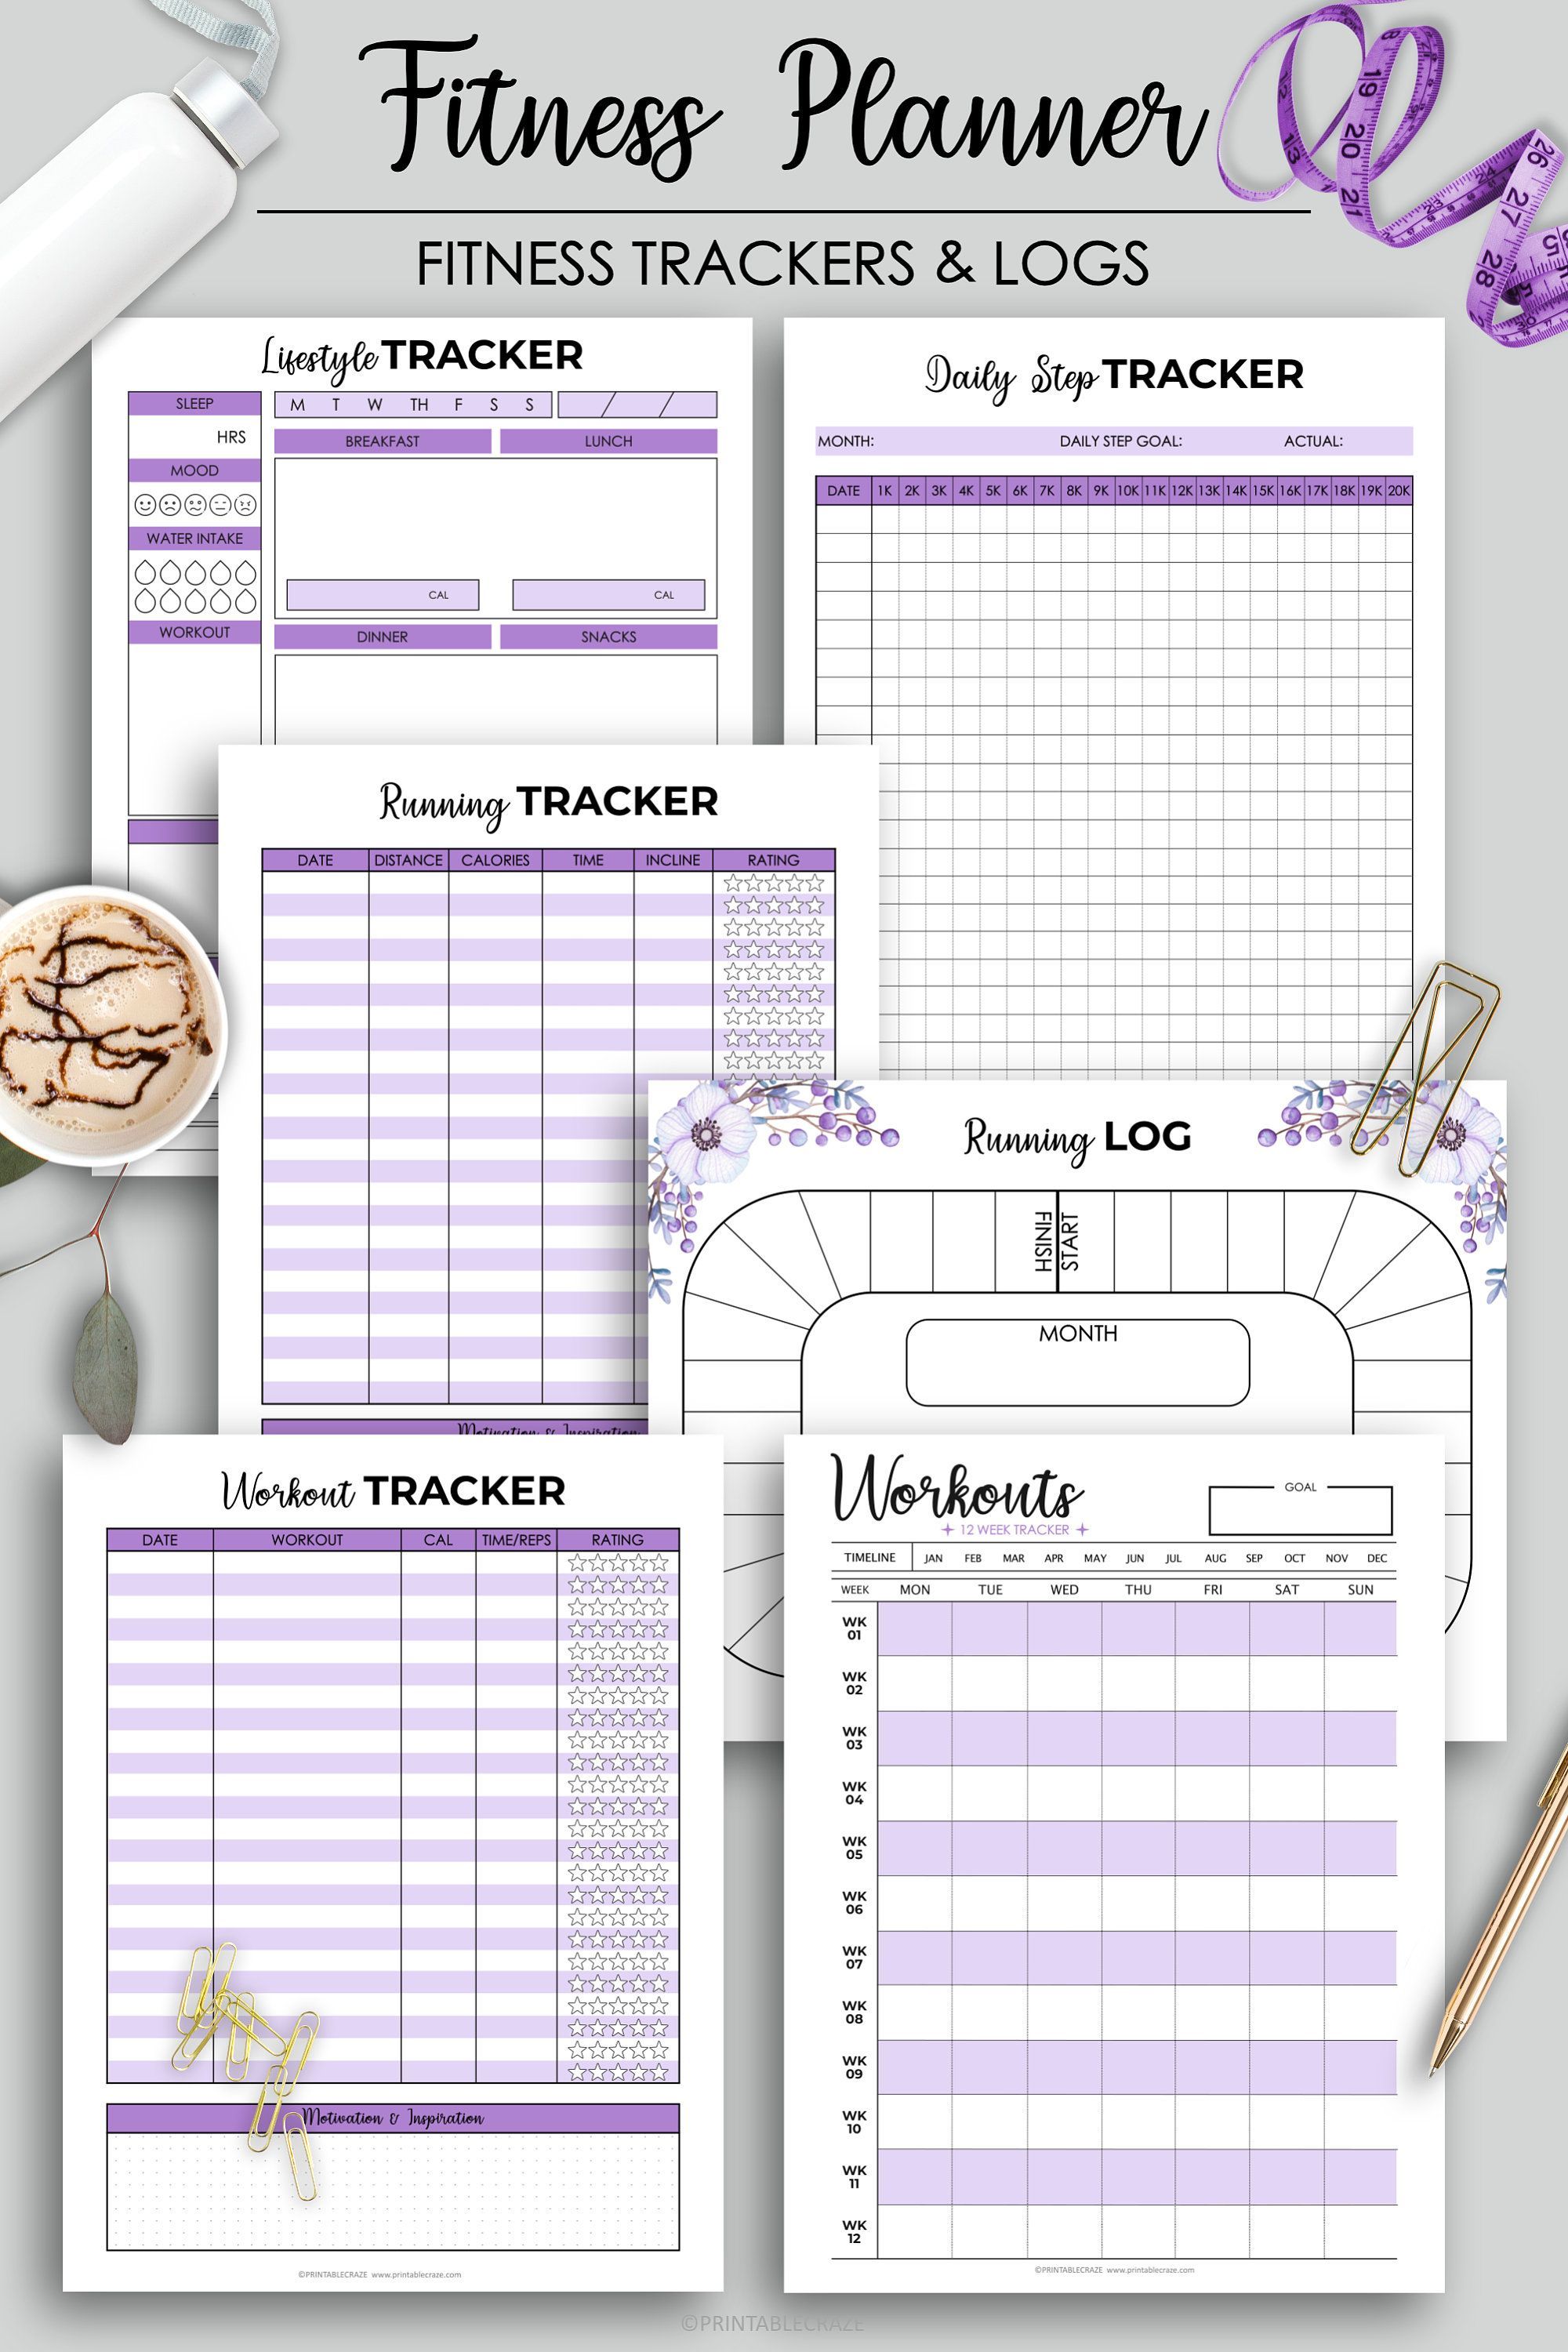 Fitness Planner Printable Weight Loss Health Planner Fitness Journal Workout Log Food Diary Calorie Tracker Daily Weight Loss Step Tracker -   fitness Planner pages